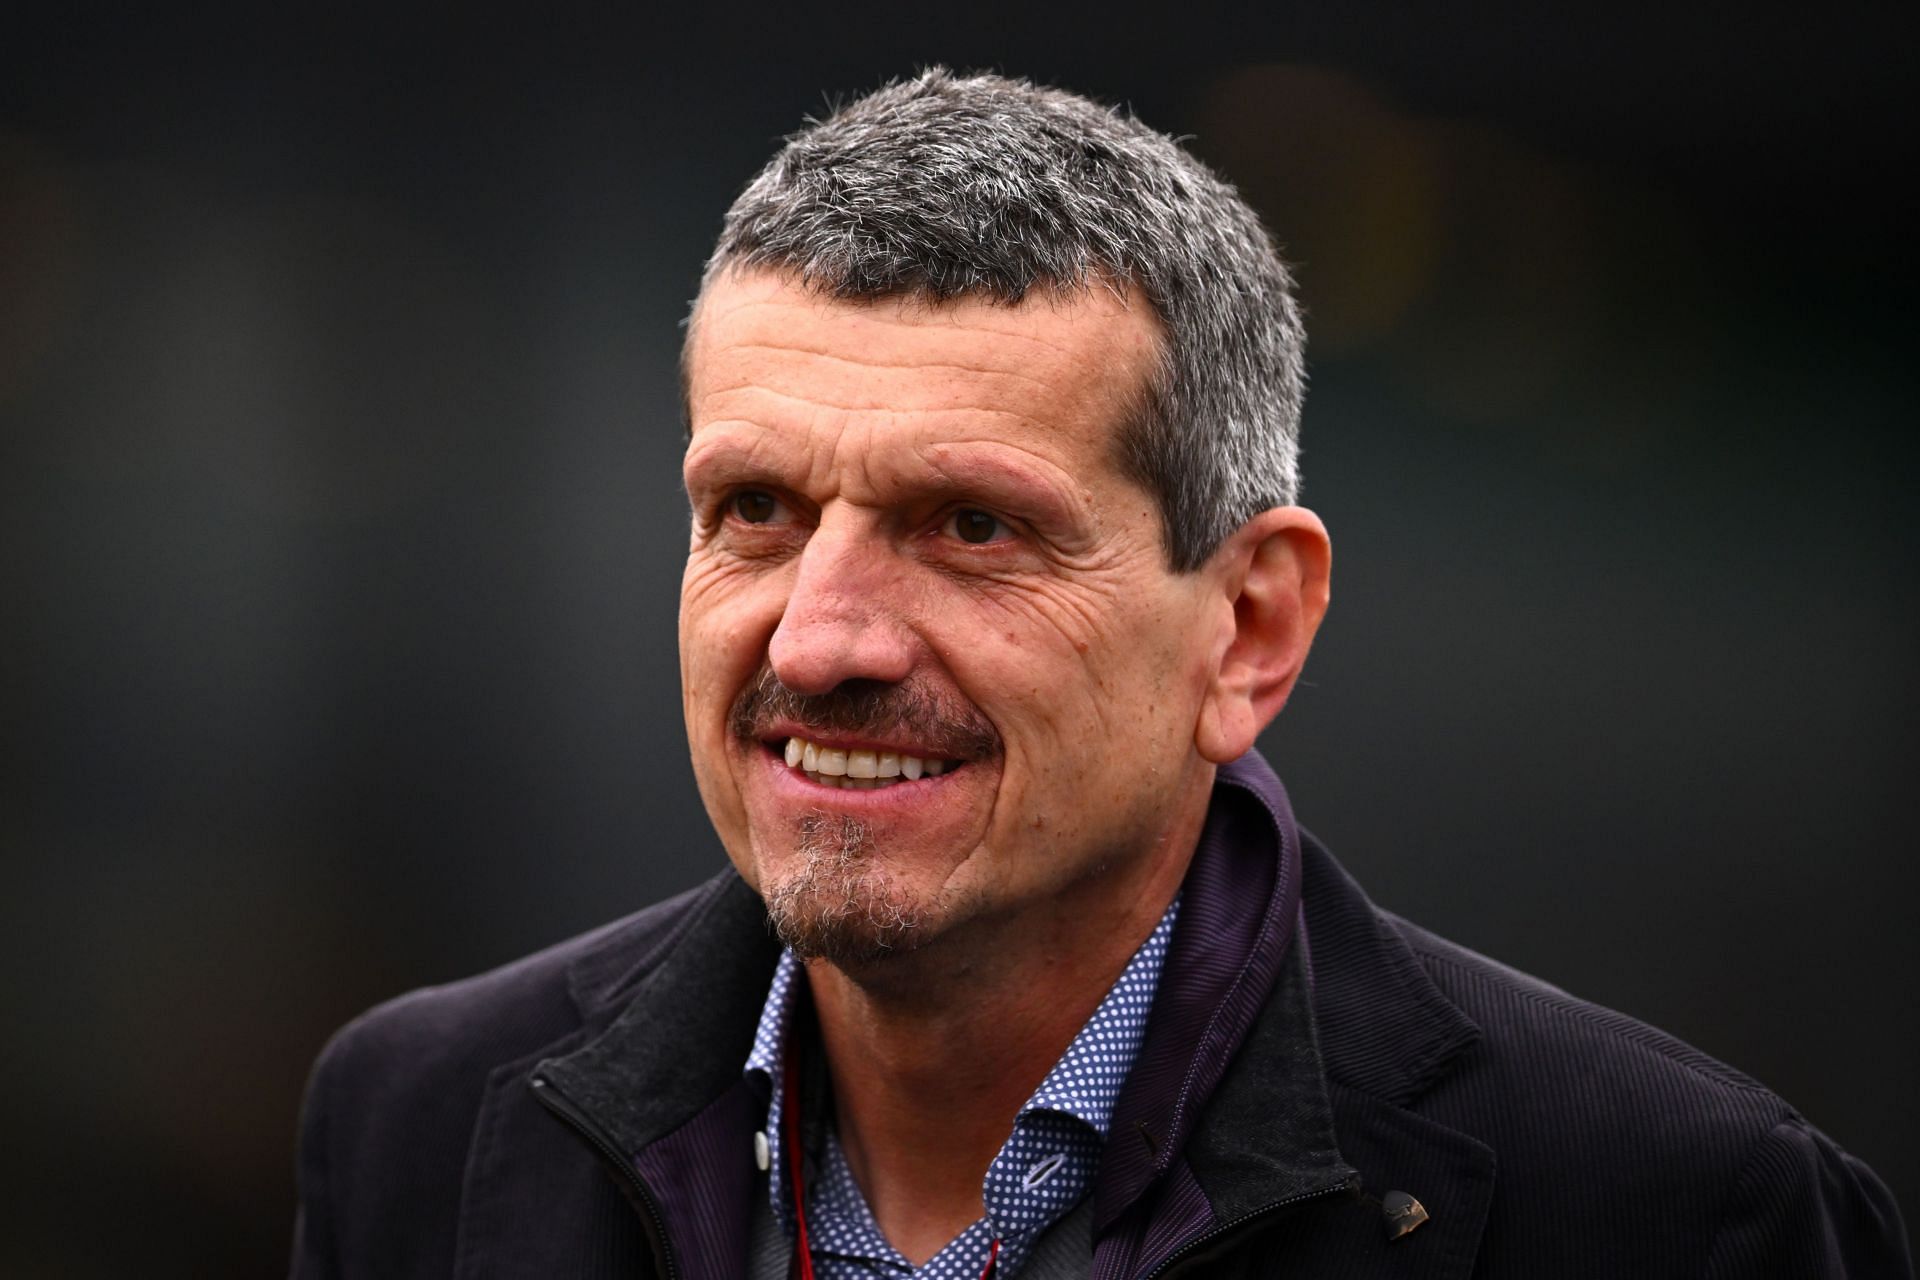 Haas F1 team principal Gunther Steiner was in a jovial mood after the 2022 F1 Spanish GP (Photo by Clive Mason/Getty Images)